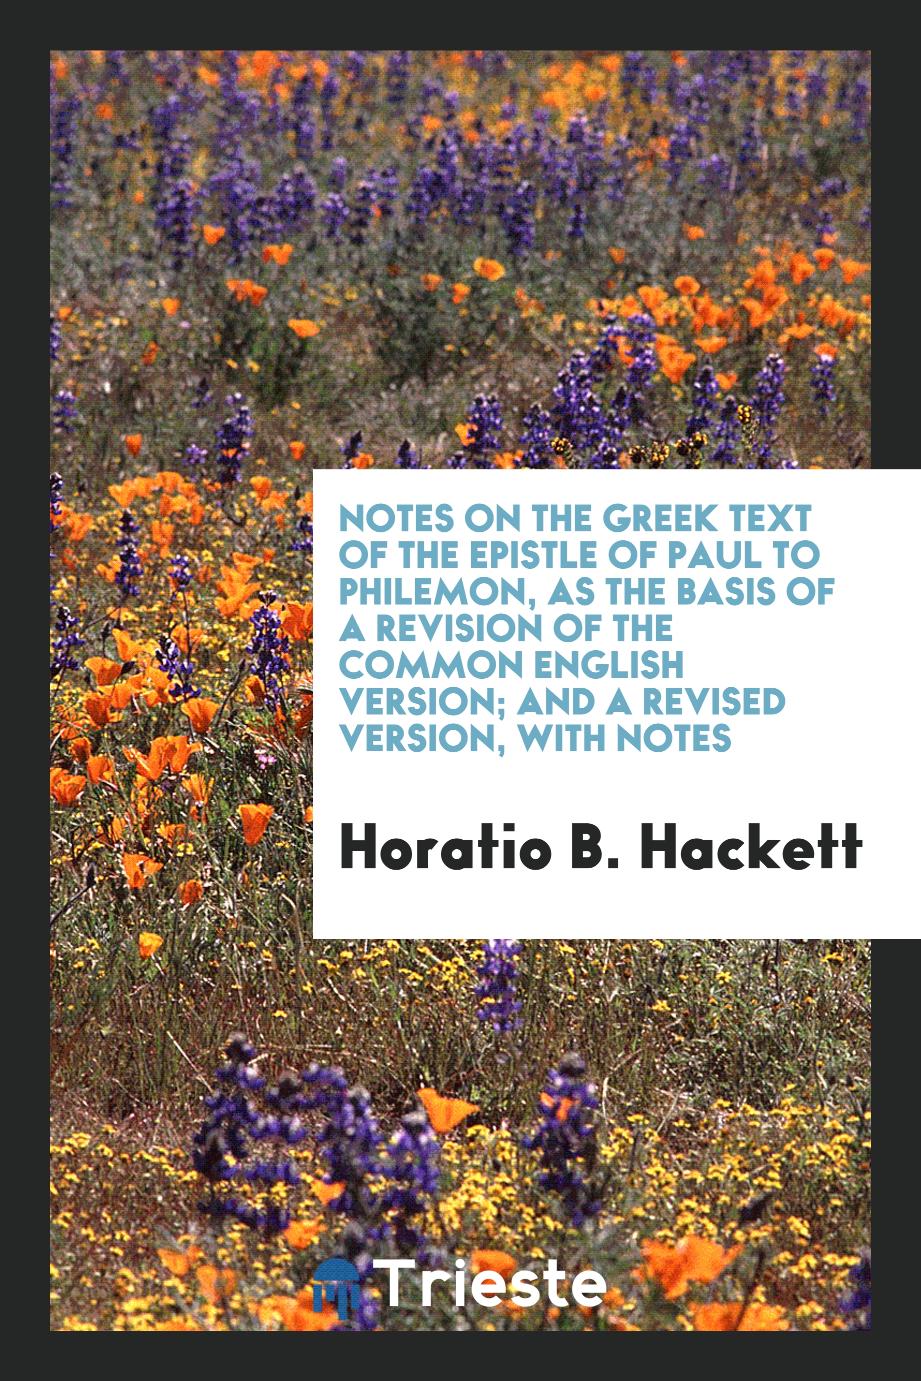 Horatio B. Hackett - Notes on the Greek Text of the Epistle of Paul to Philemon, as the Basis of a Revision of the Common English Version; And a Revised Version, with Notes